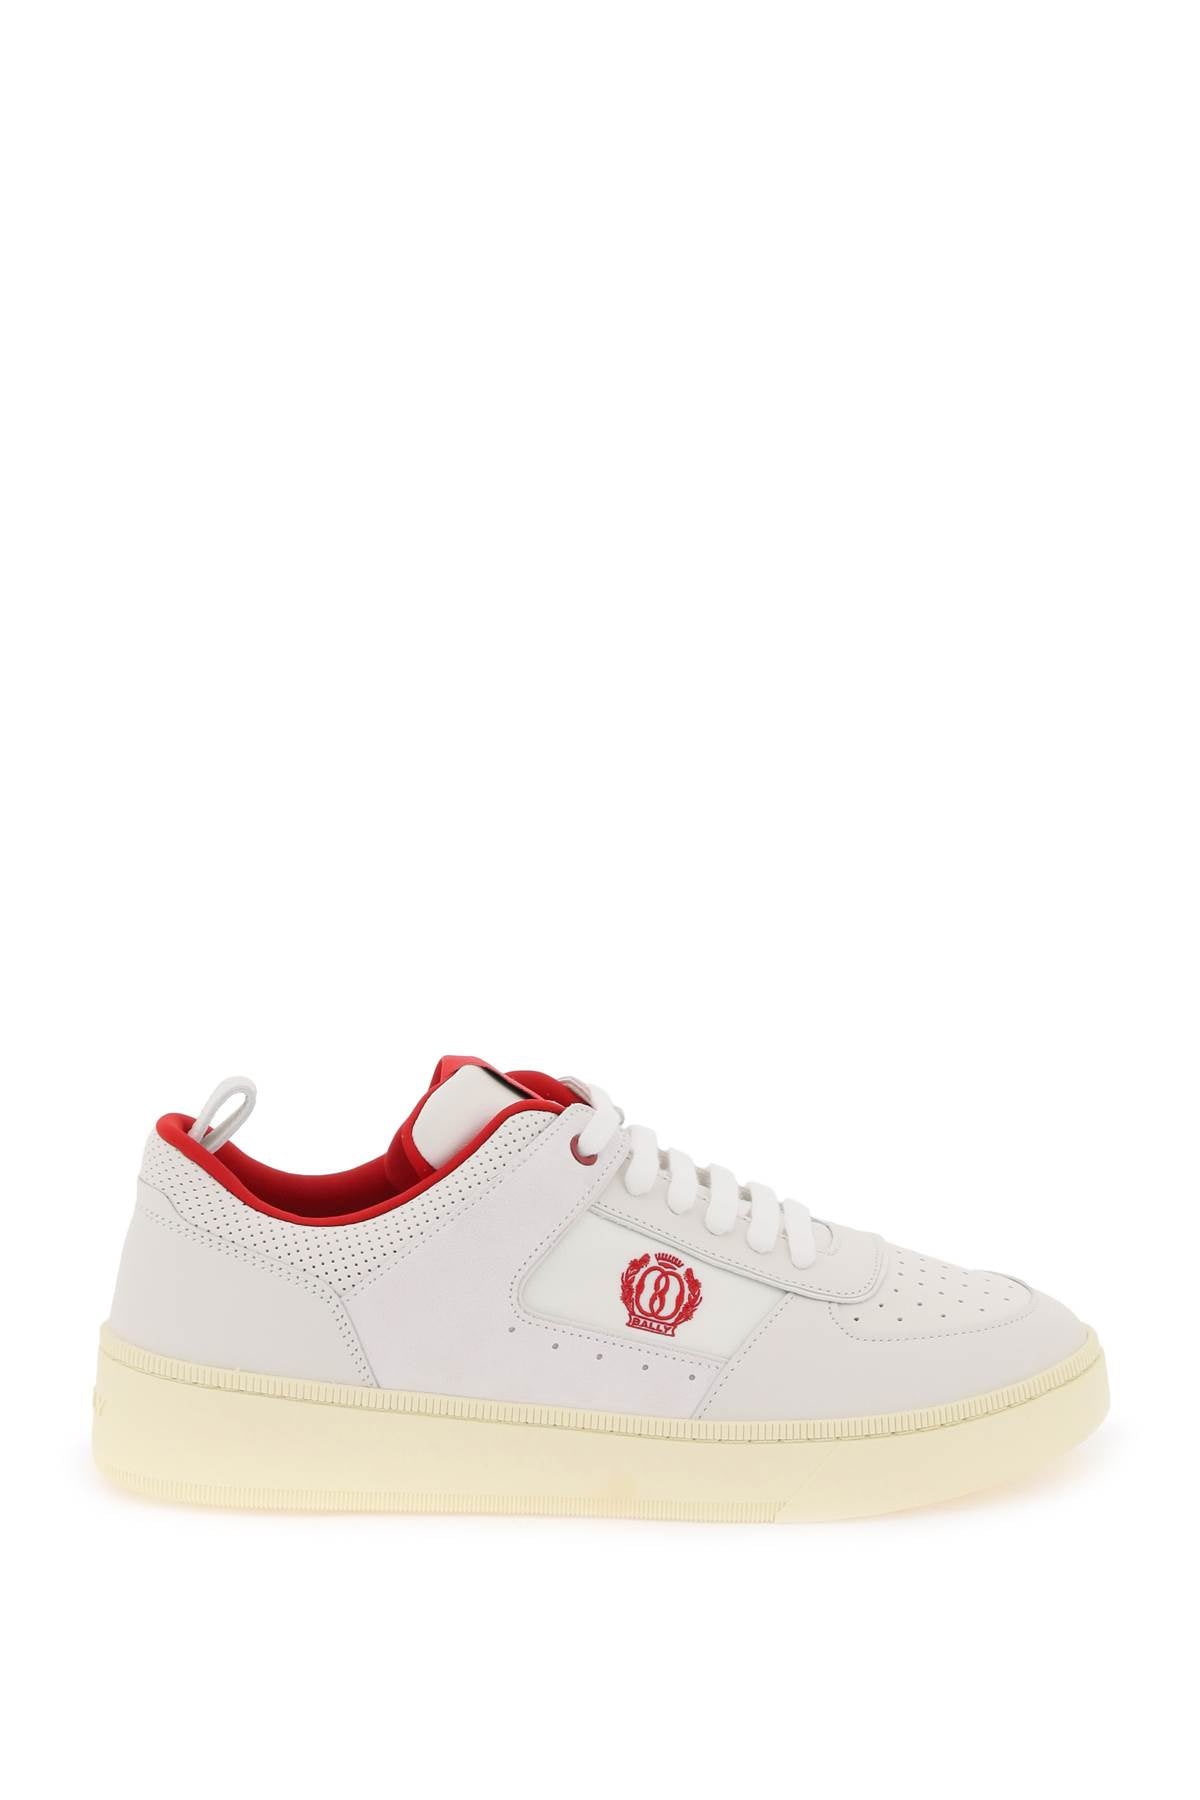 Bally leather riweira sneakers-0